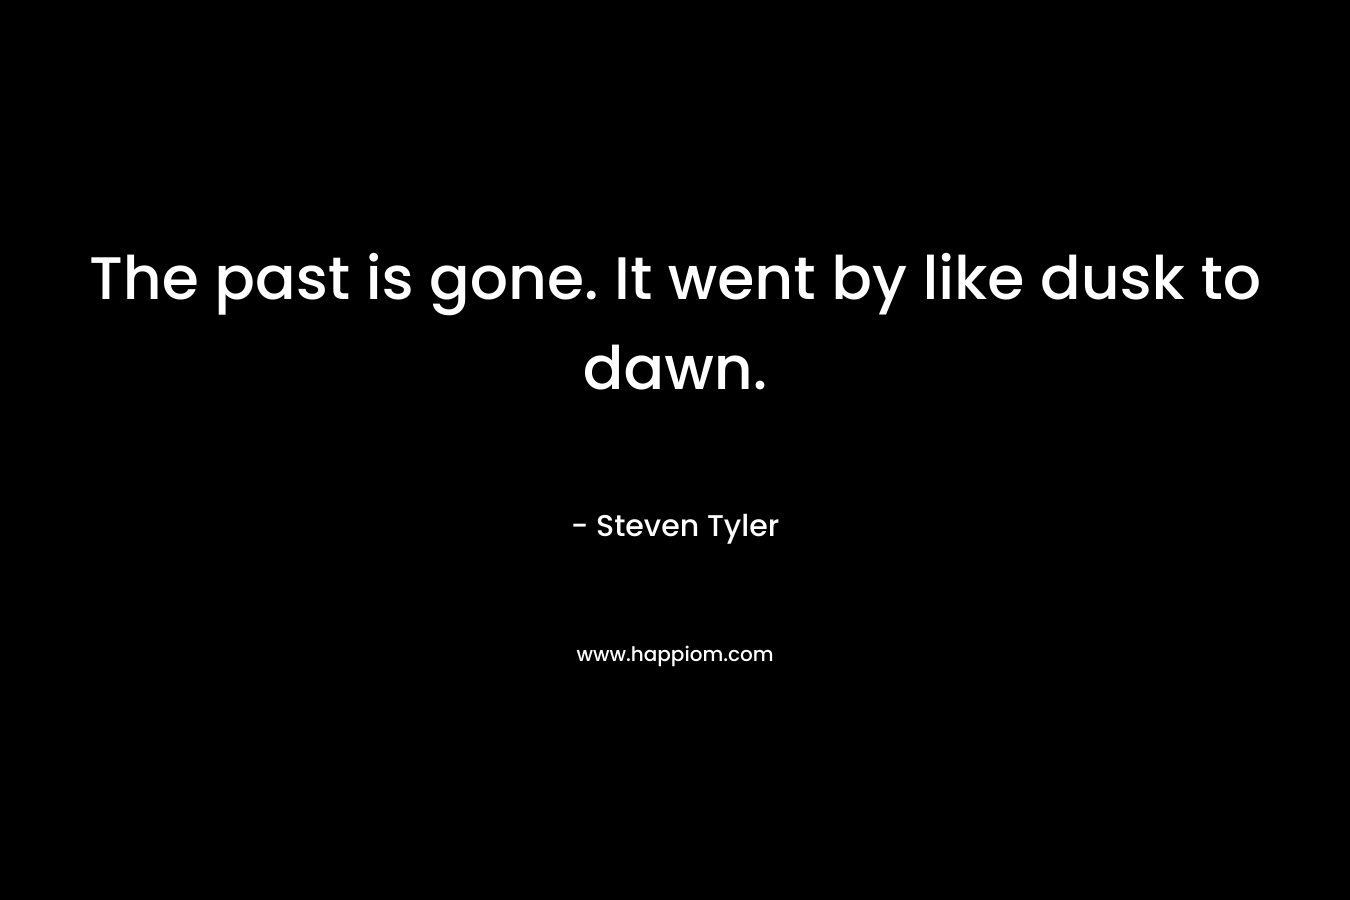 The past is gone. It went by like dusk to dawn.